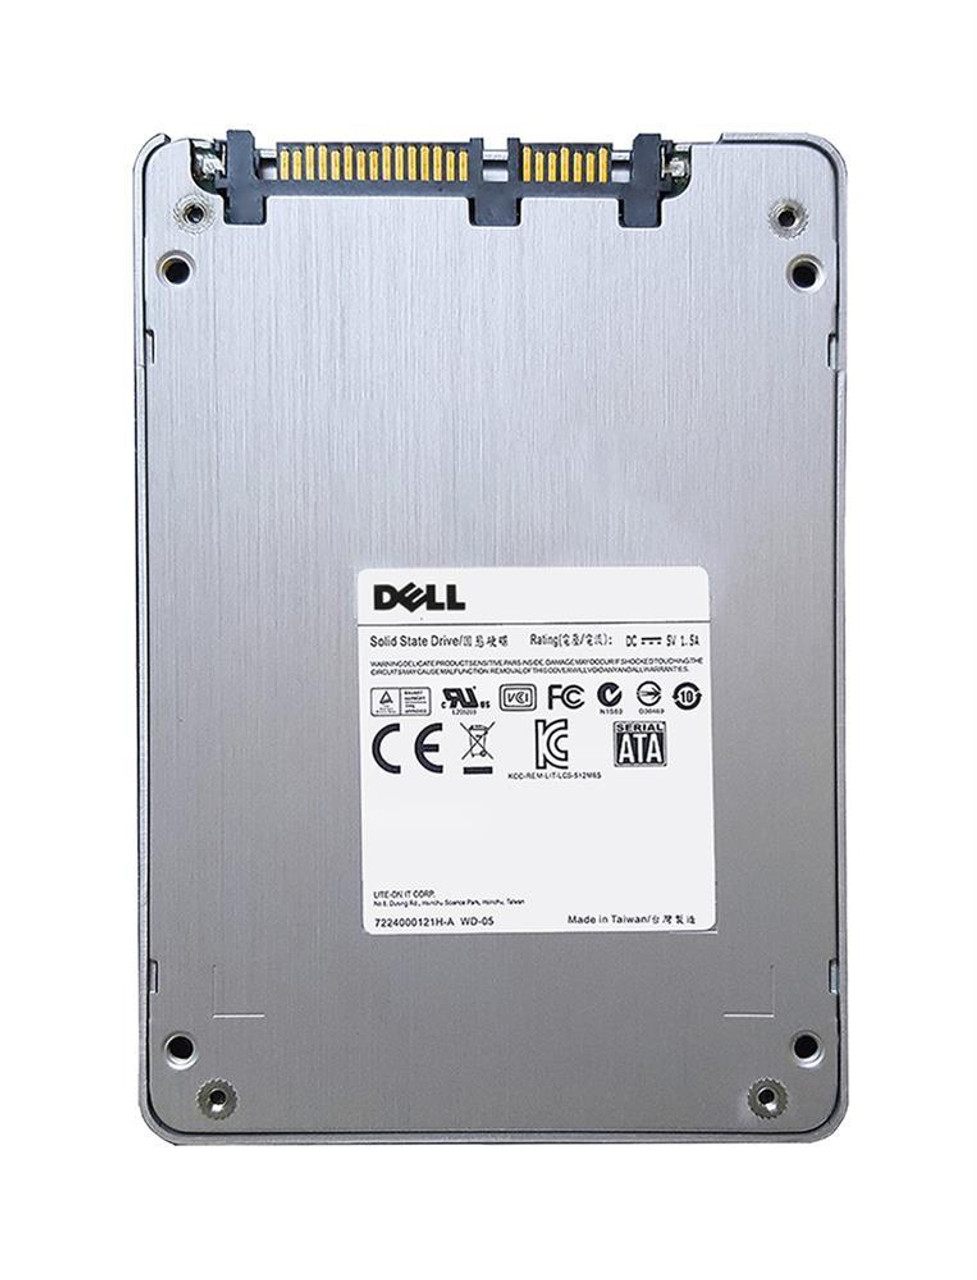 6NDW6 Dell 120GB MLC SATA 6Gbps 2.5-inch Internal Solid State Drive (SSD) (Boot Drive)